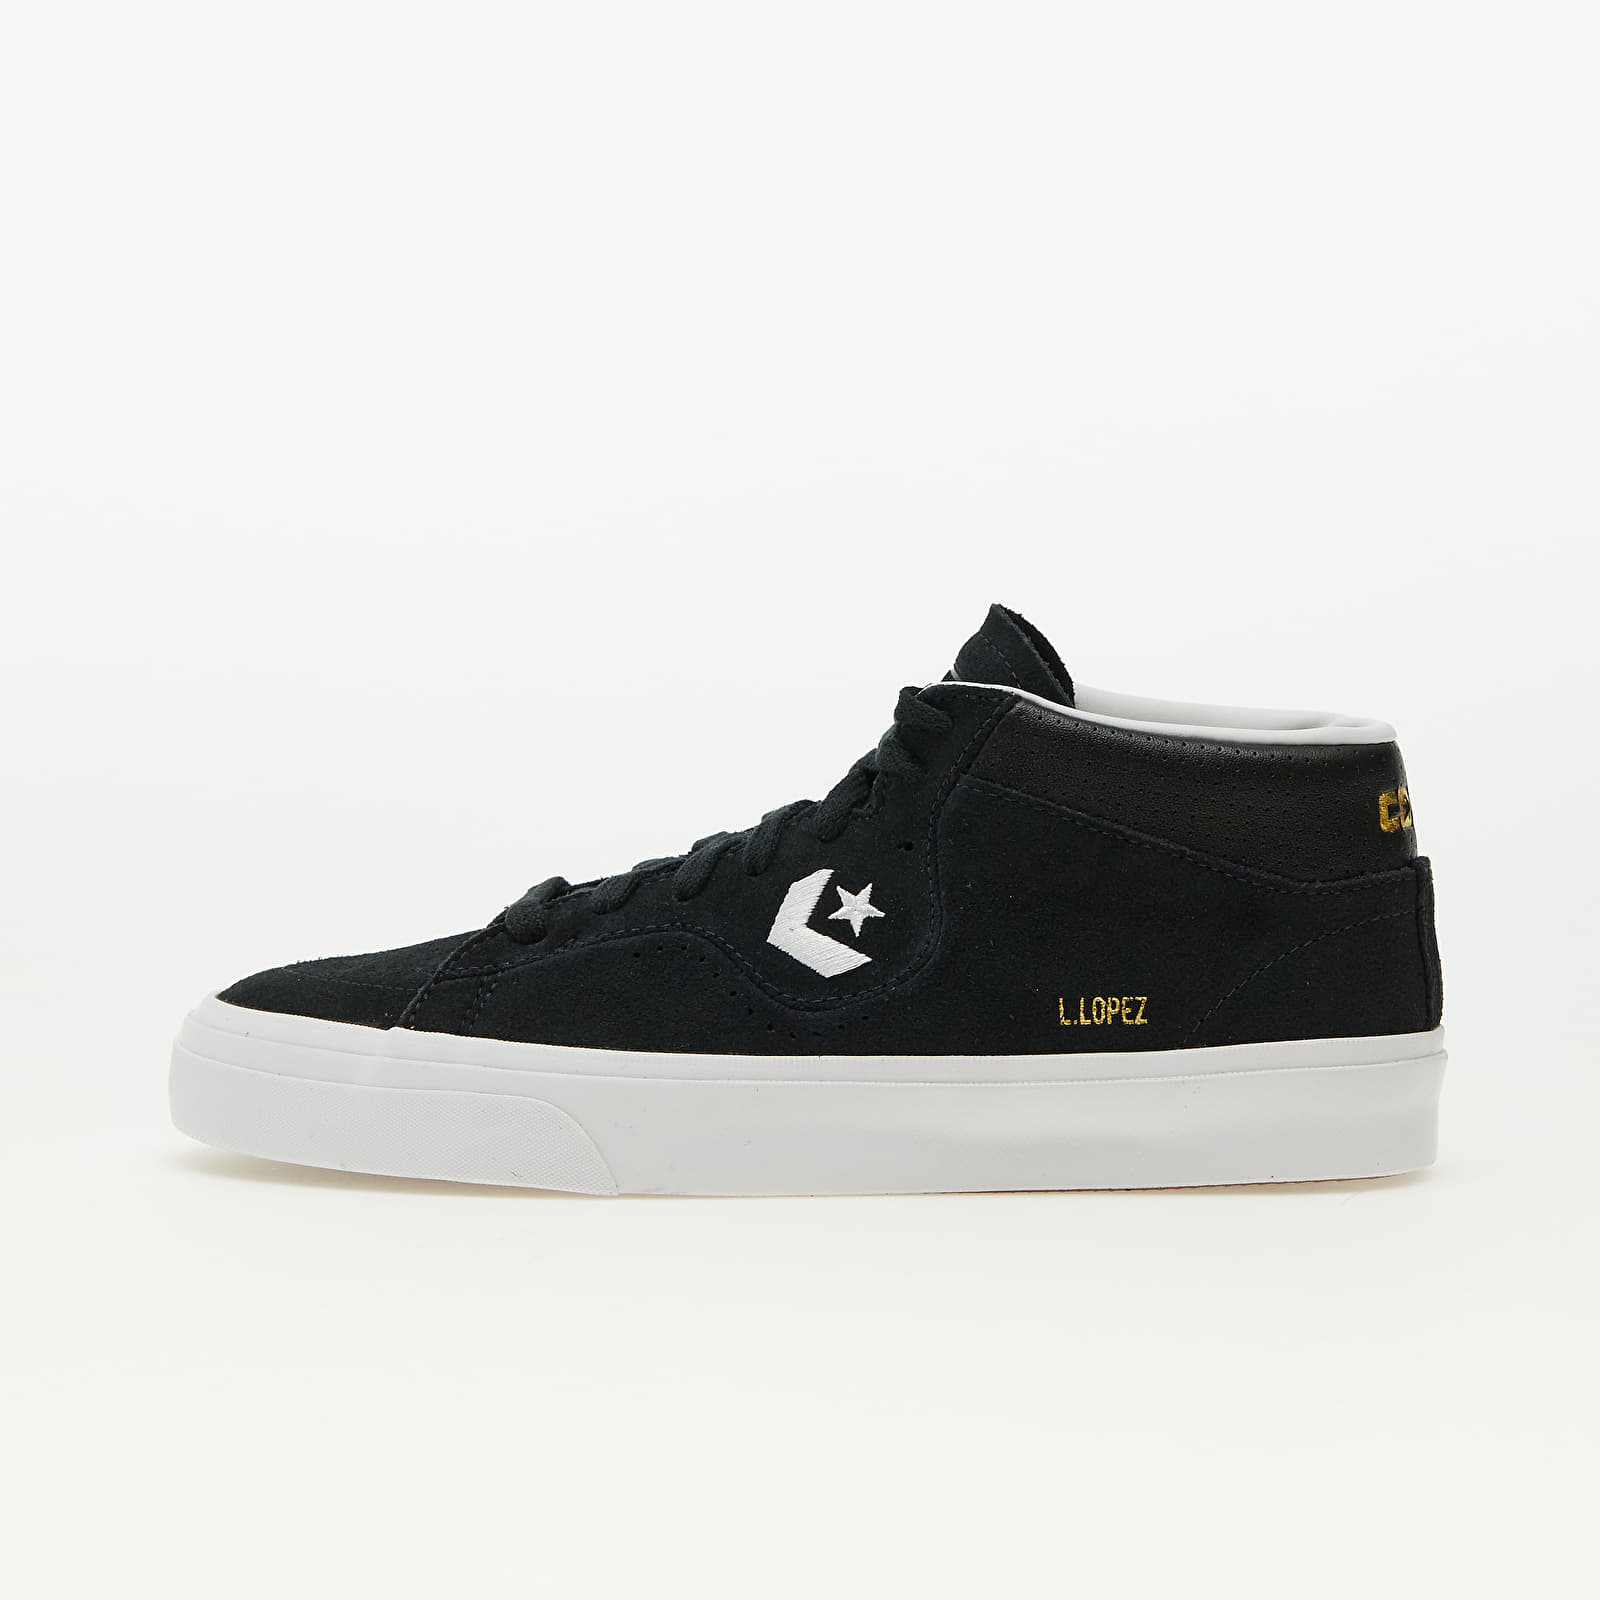 Men's sneakers and shoes Converse Cons Louie Lopez Pro Suede And Leather Black/ Black/ White